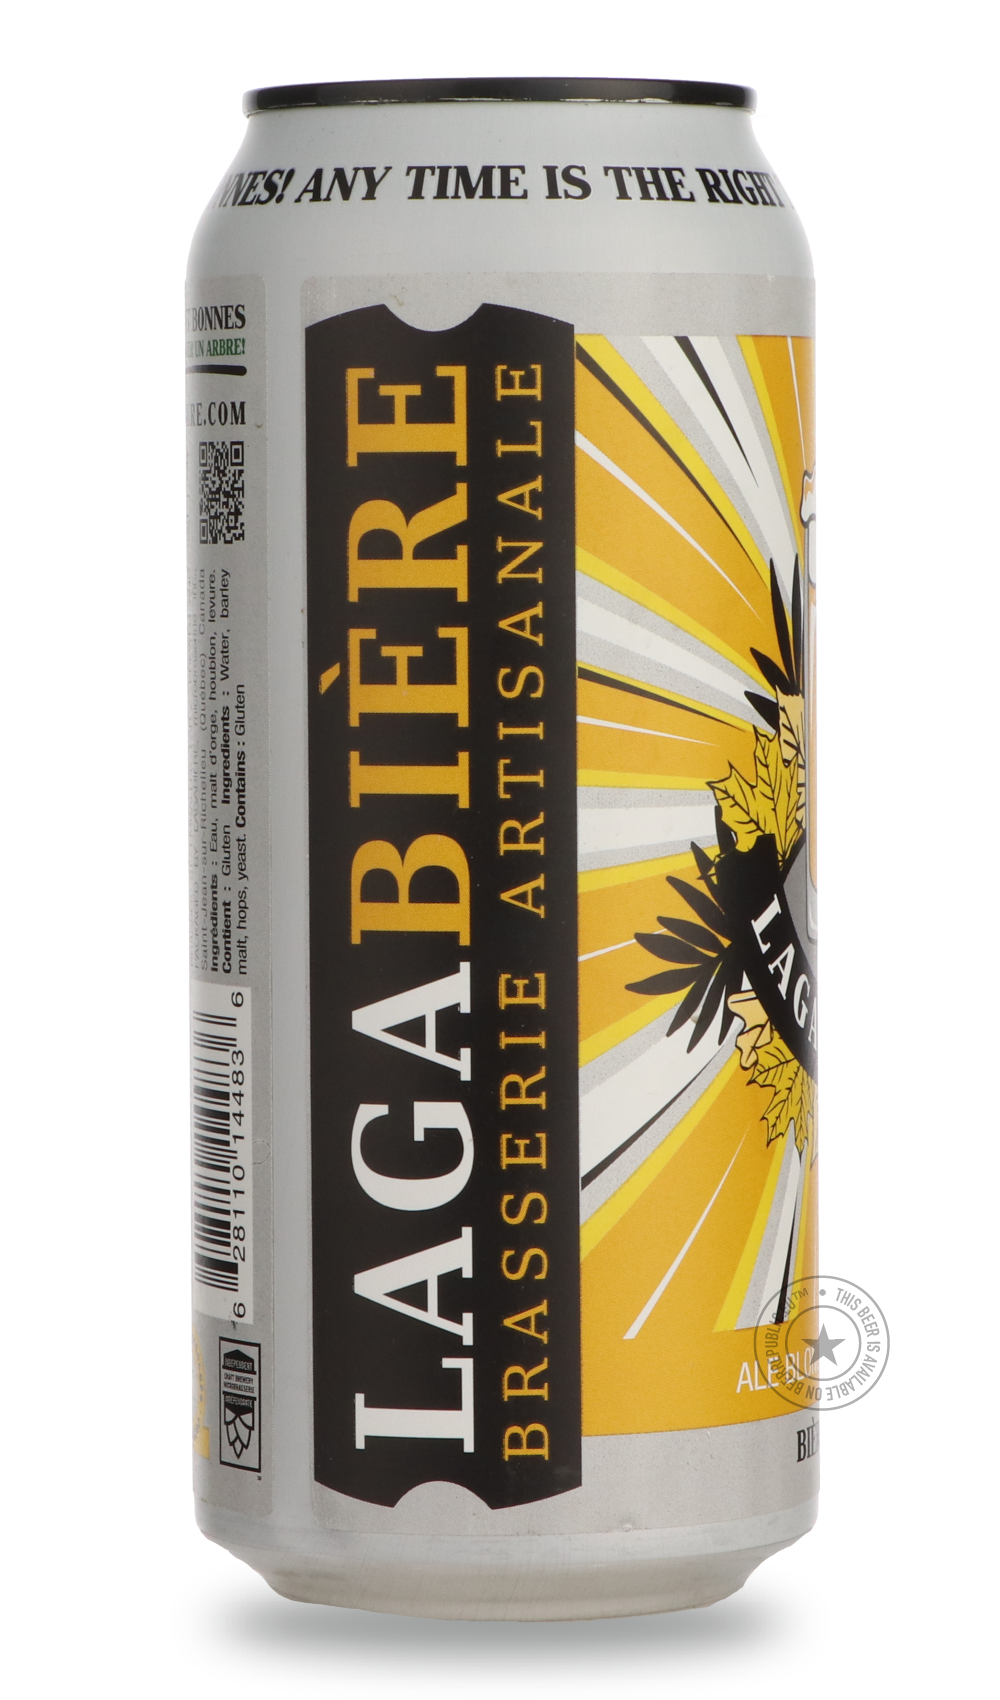 -Lagabière- LagaBlonde-Pale- Only @ Beer Republic - The best online beer store for American & Canadian craft beer - Buy beer online from the USA and Canada - Bier online kopen - Amerikaans bier kopen - Craft beer store - Craft beer kopen - Amerikanisch bier kaufen - Bier online kaufen - Acheter biere online - IPA - Stout - Porter - New England IPA - Hazy IPA - Imperial Stout - Barrel Aged - Barrel Aged Imperial Stout - Brown - Dark beer - Blond - Blonde - Pilsner - Lager - Wheat - Weizen - Amber - Barley Wi